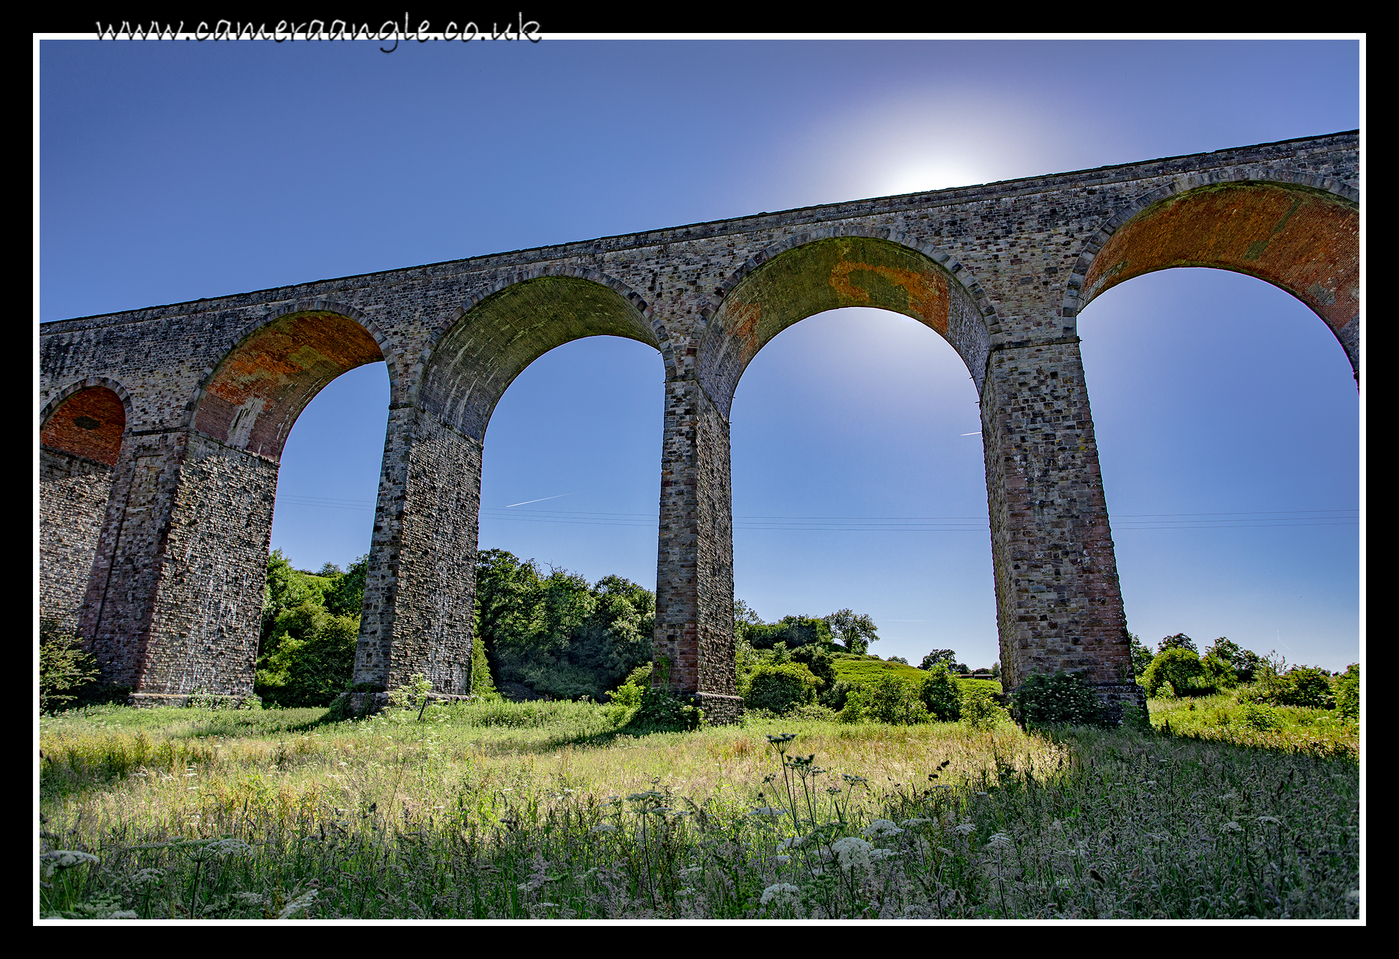 Pensford Viaduct
Shot straight in to the sun, so stretched colours, but an interesting image overall.
Keywords: Pensford Viaduct Mendips Tour